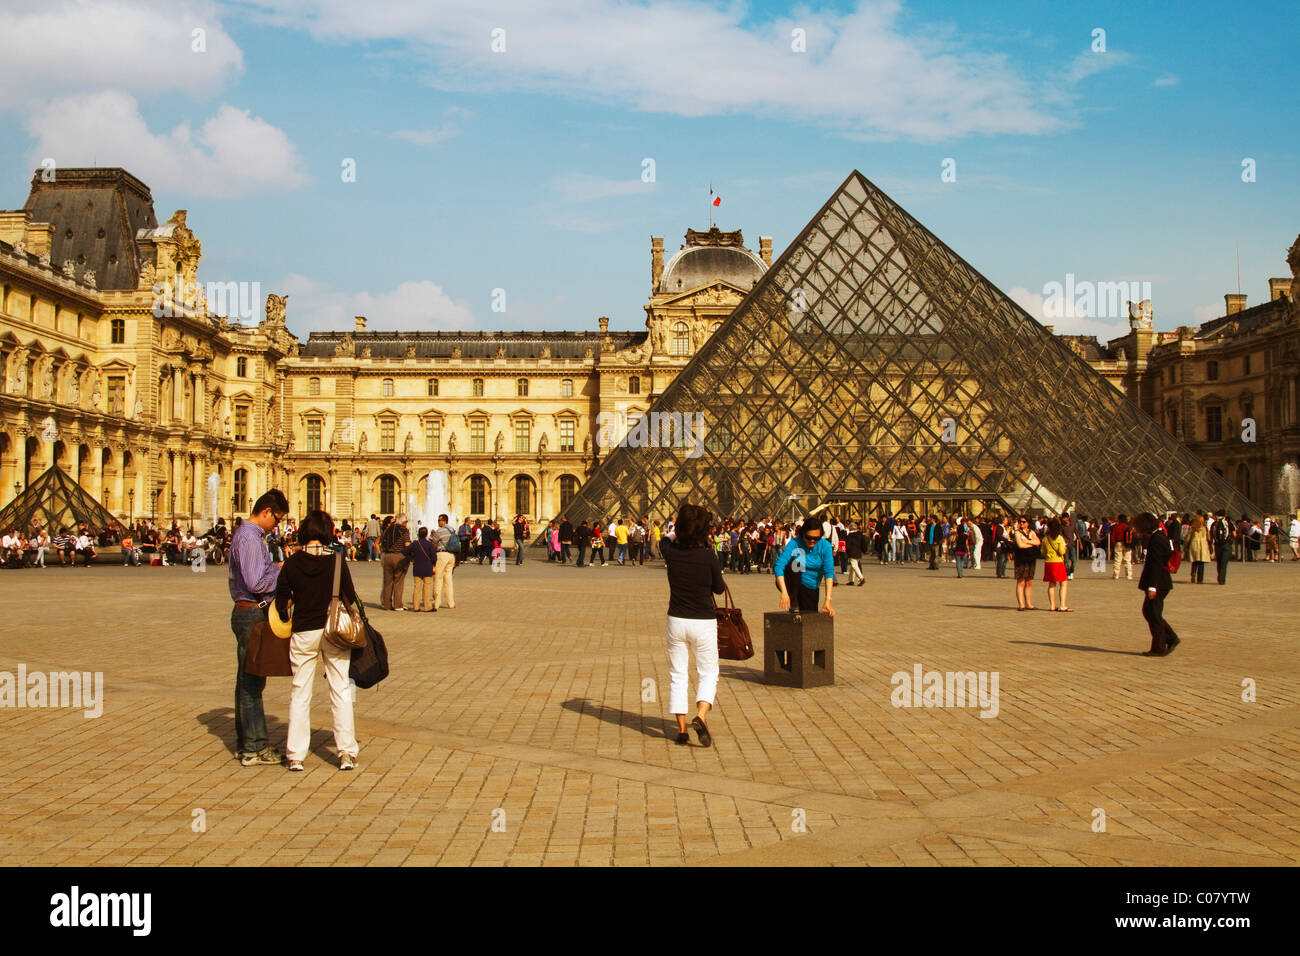 Tourists near a pyramid, Louvre Pyramid, Musee du Louvre, Paris, France Stock Photo